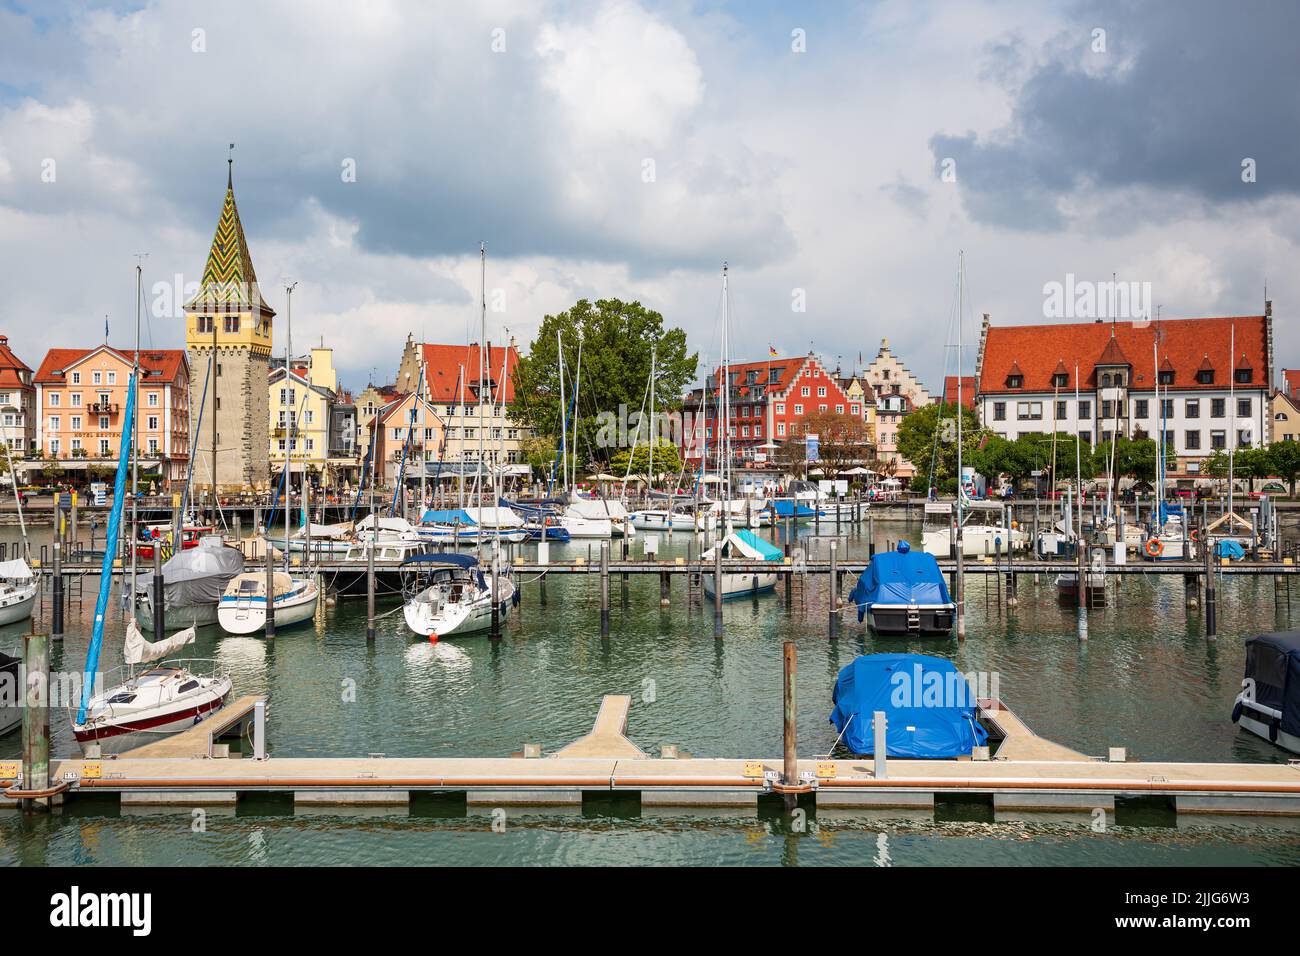 Harbor view of the city of Lindau, Lake Constance, Germany Stock Photo